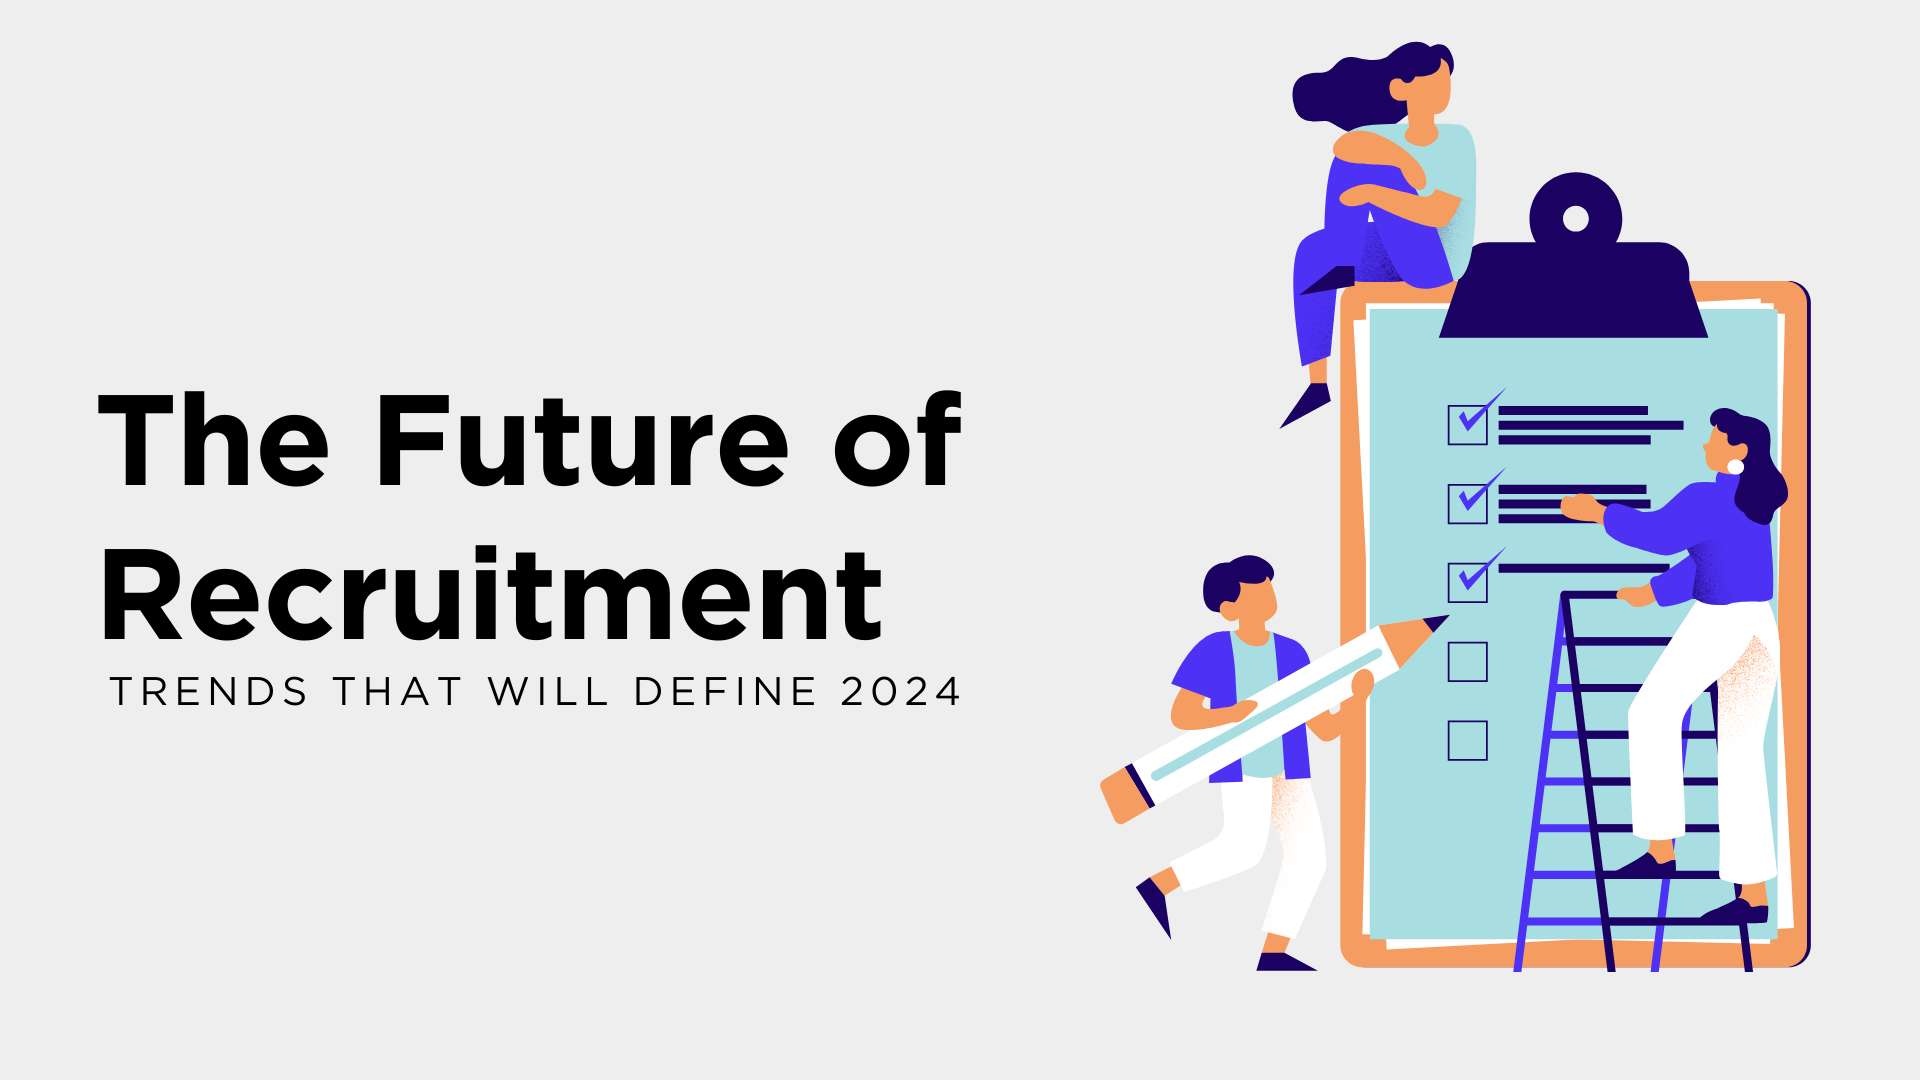 The Future of Recruitment: Trends That Will Define 2024